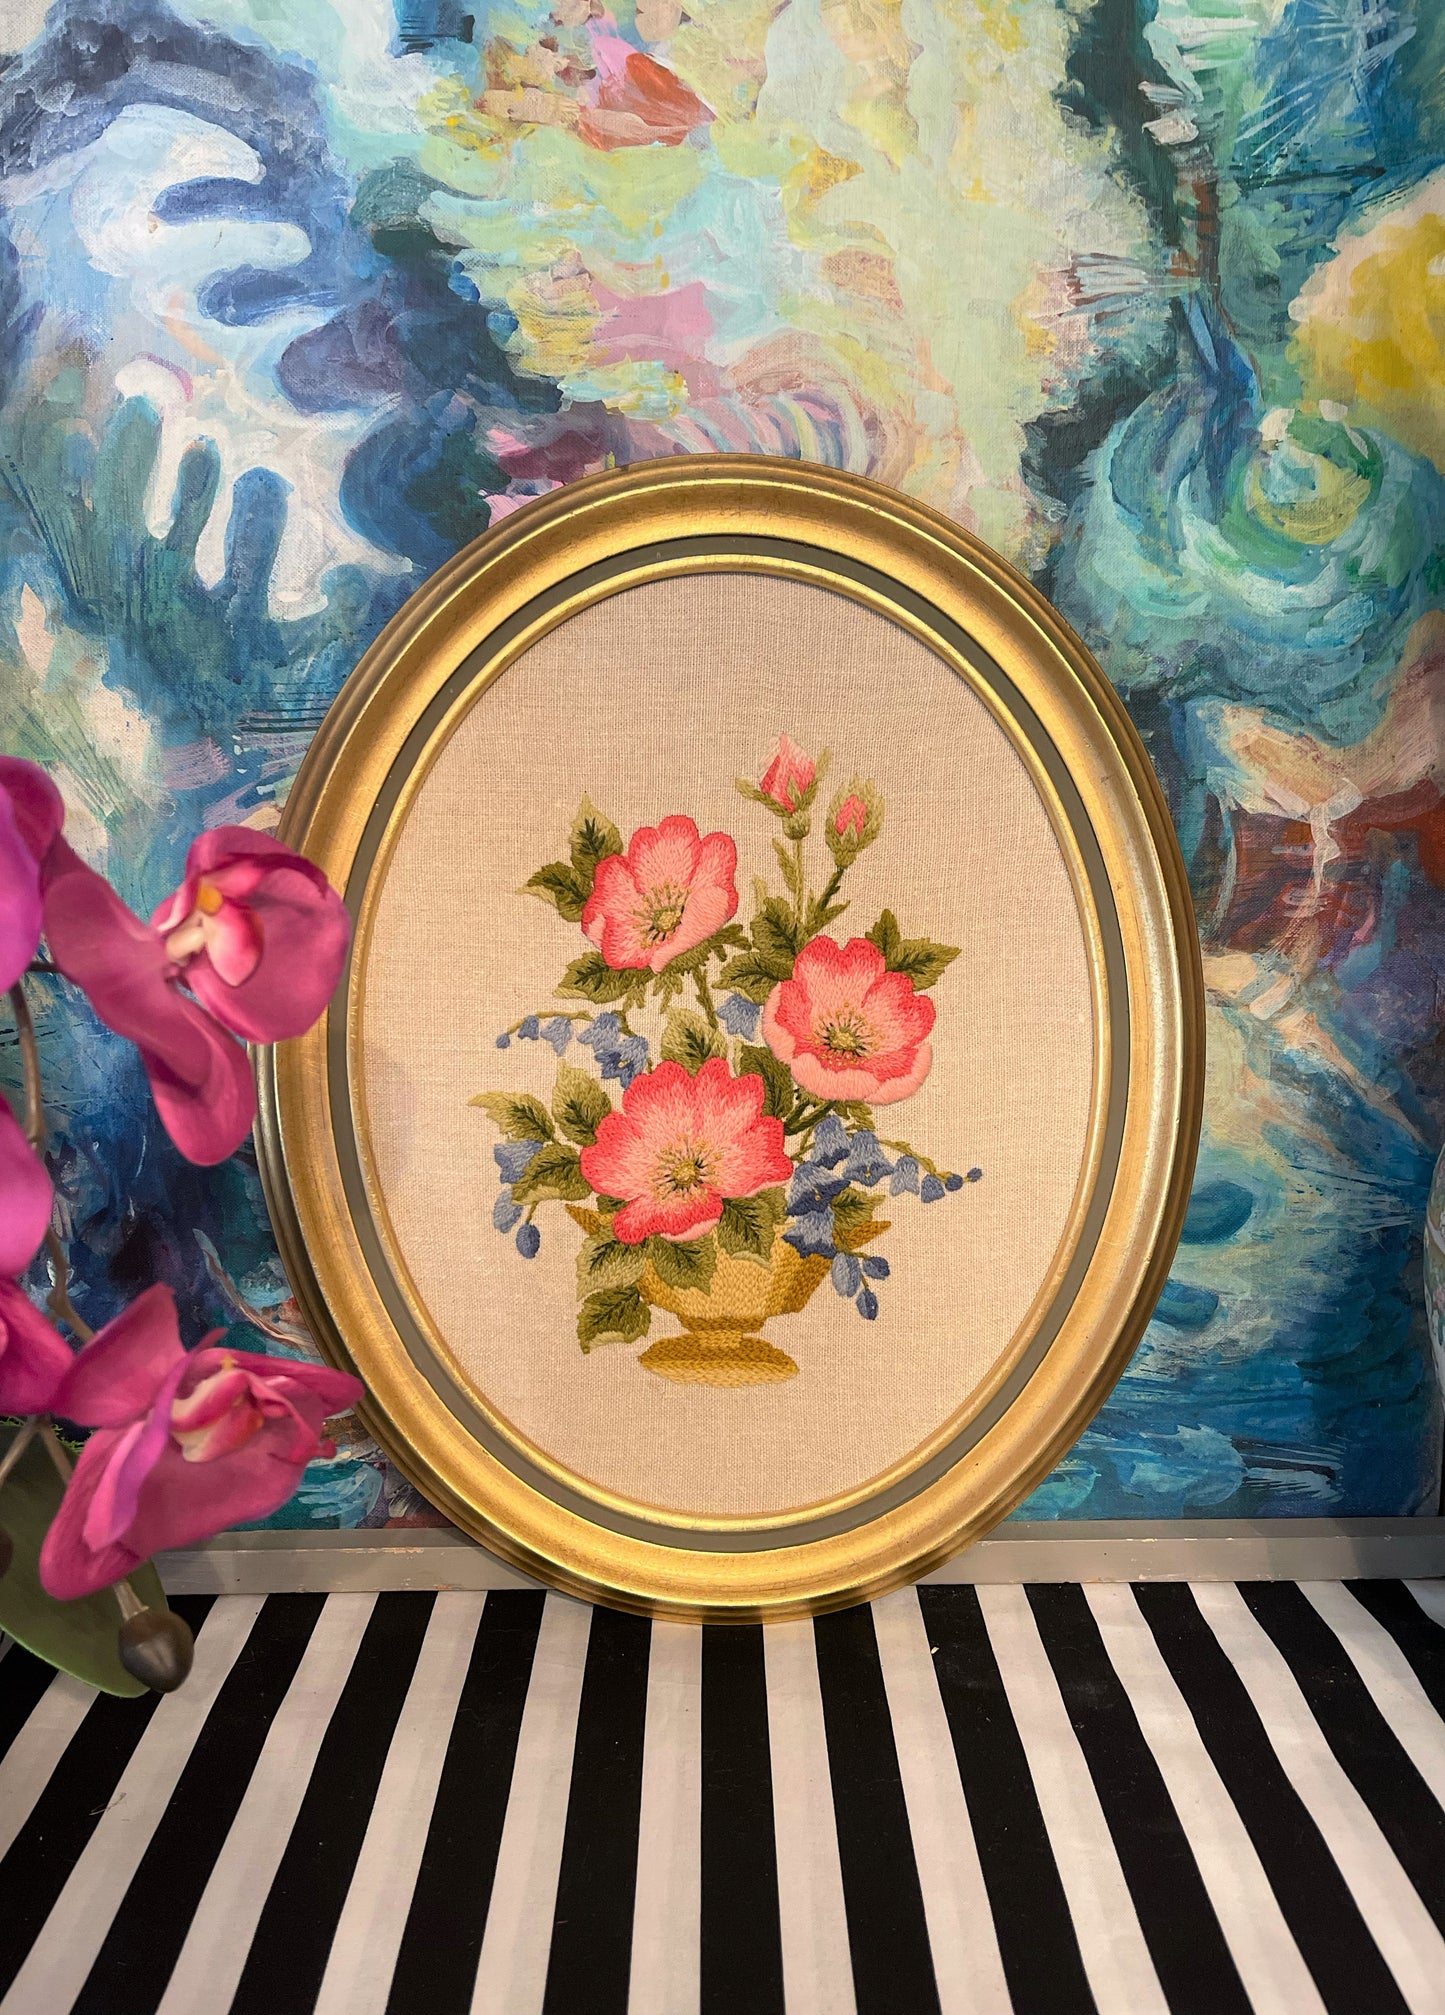 Pink Flowers in Gold Dish Vintage Crewelwork, Vintage Framed Embroidery Wall Hanging